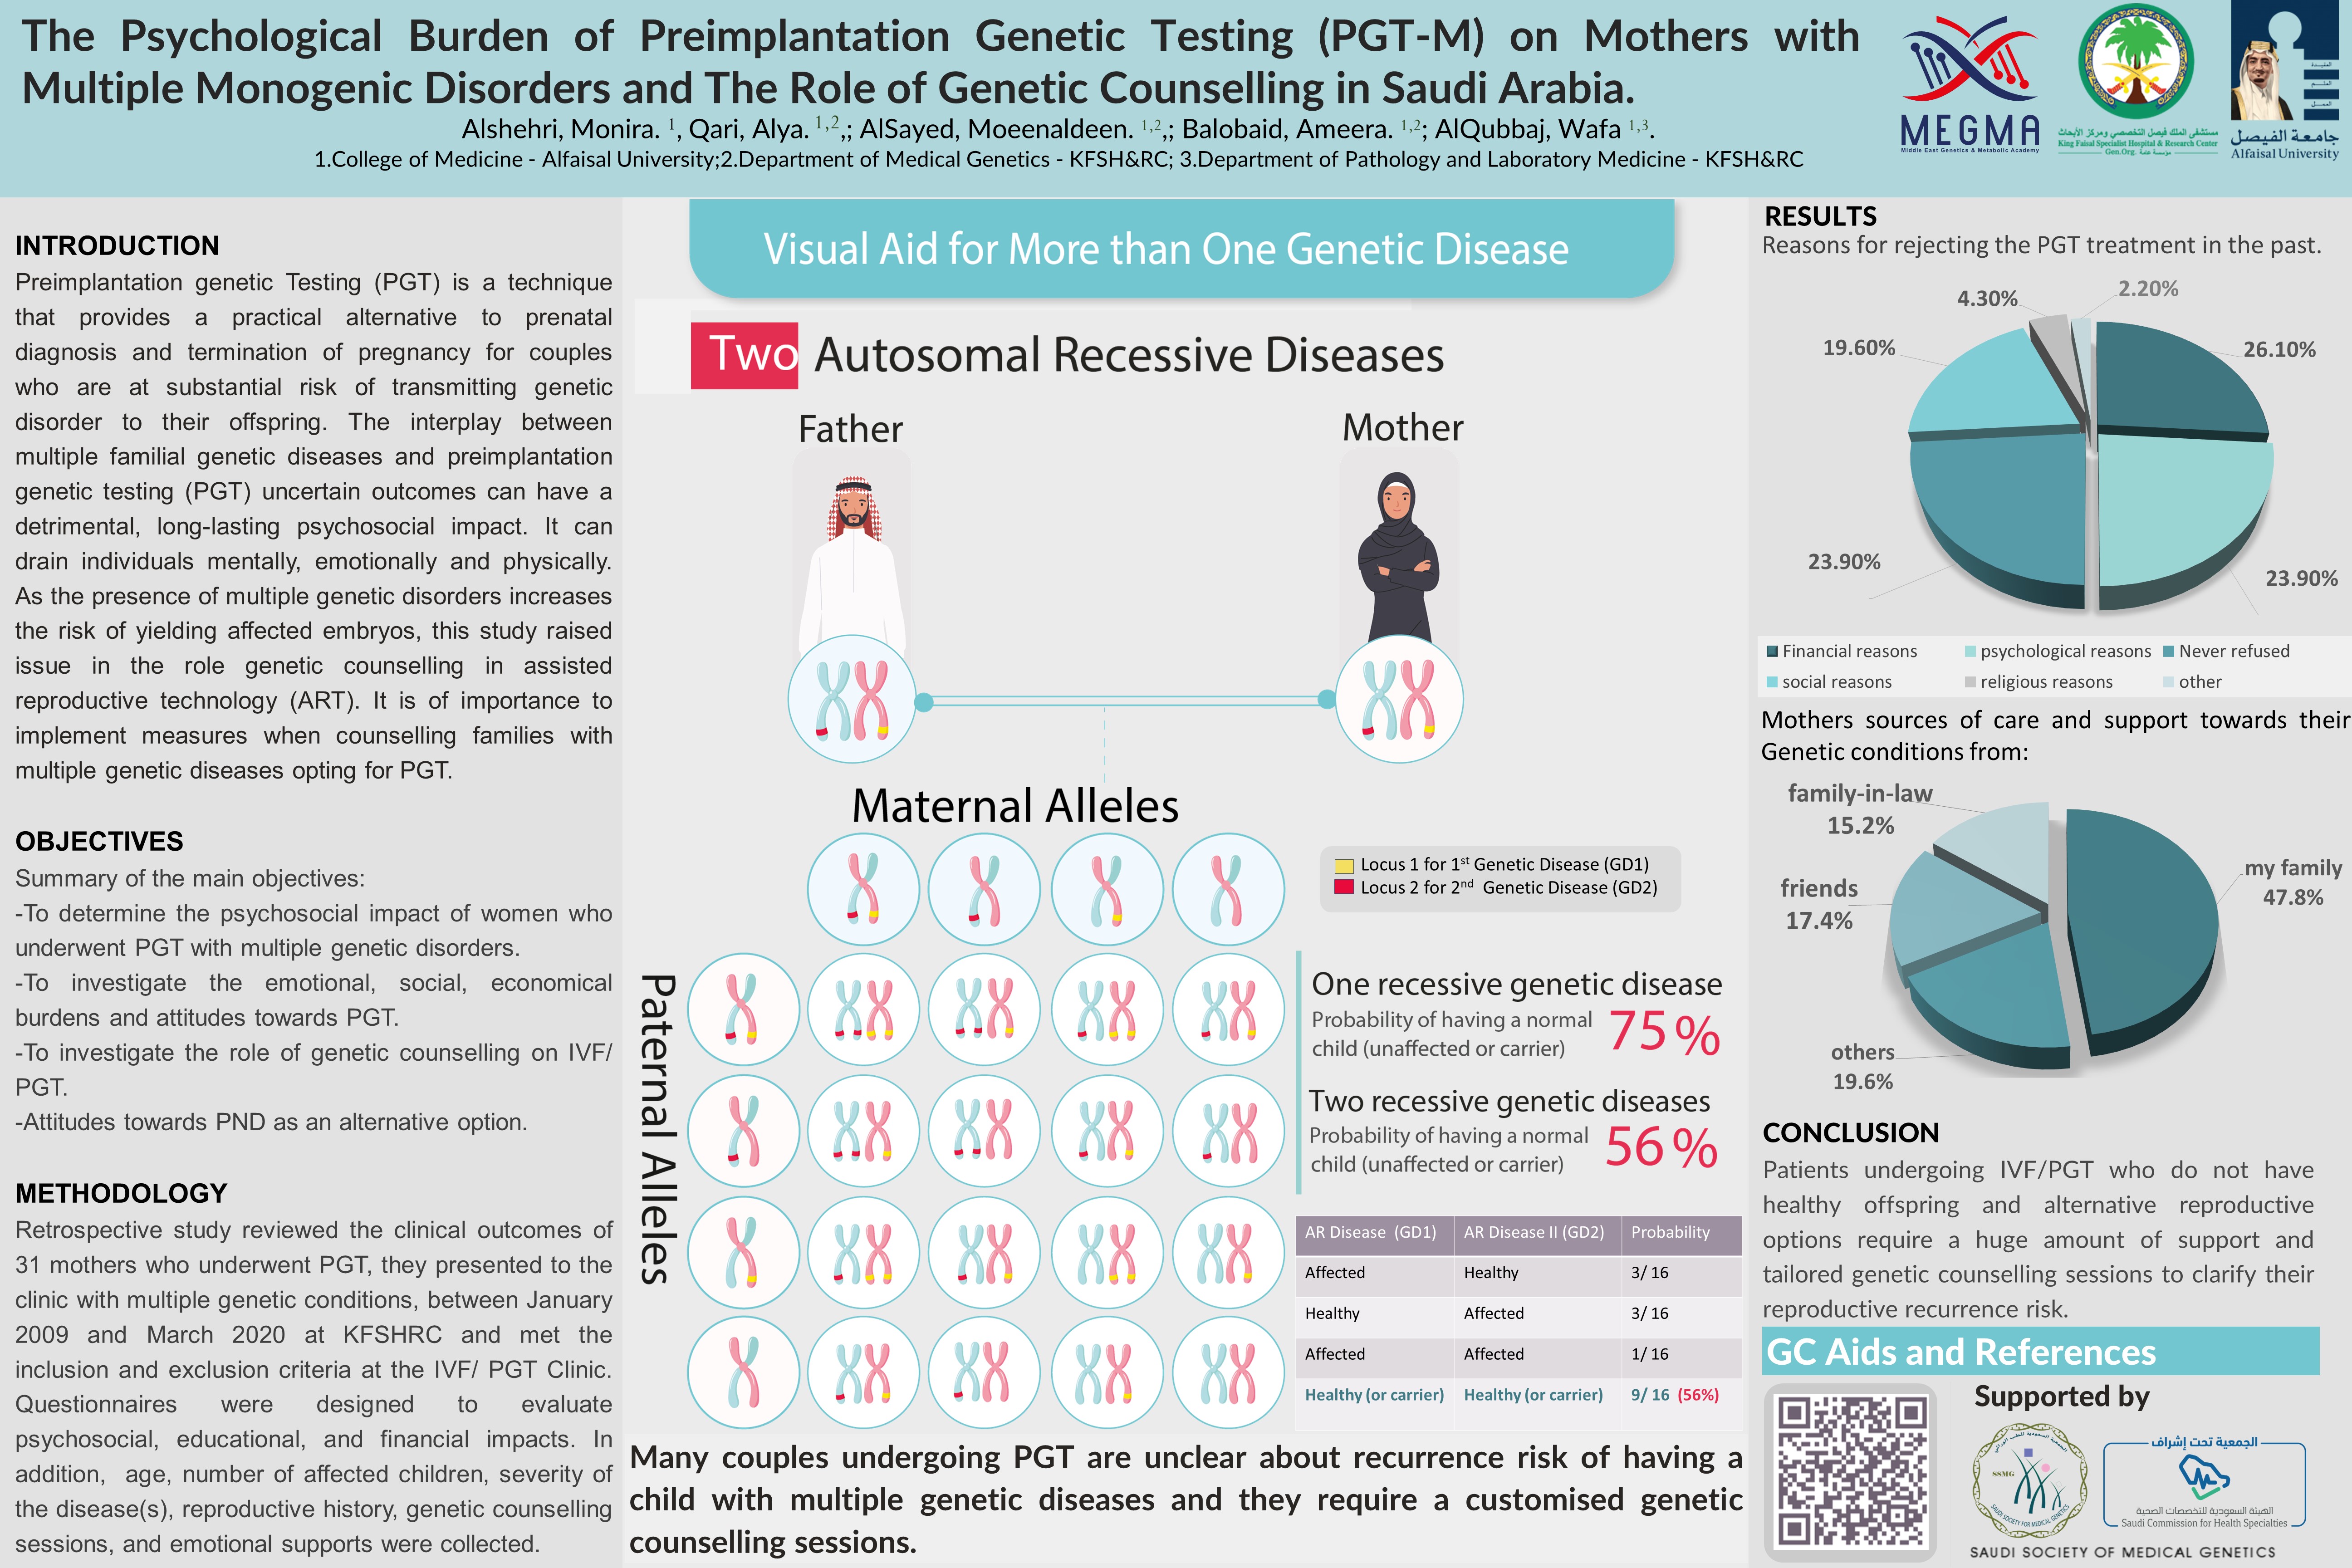 The Psychological Burden of Preimplantation Genetic Testing (PGT-M) on Mothers with Multiple Monogenic Disorders and The Role of Genetic Counselling in Saudi Arabia.